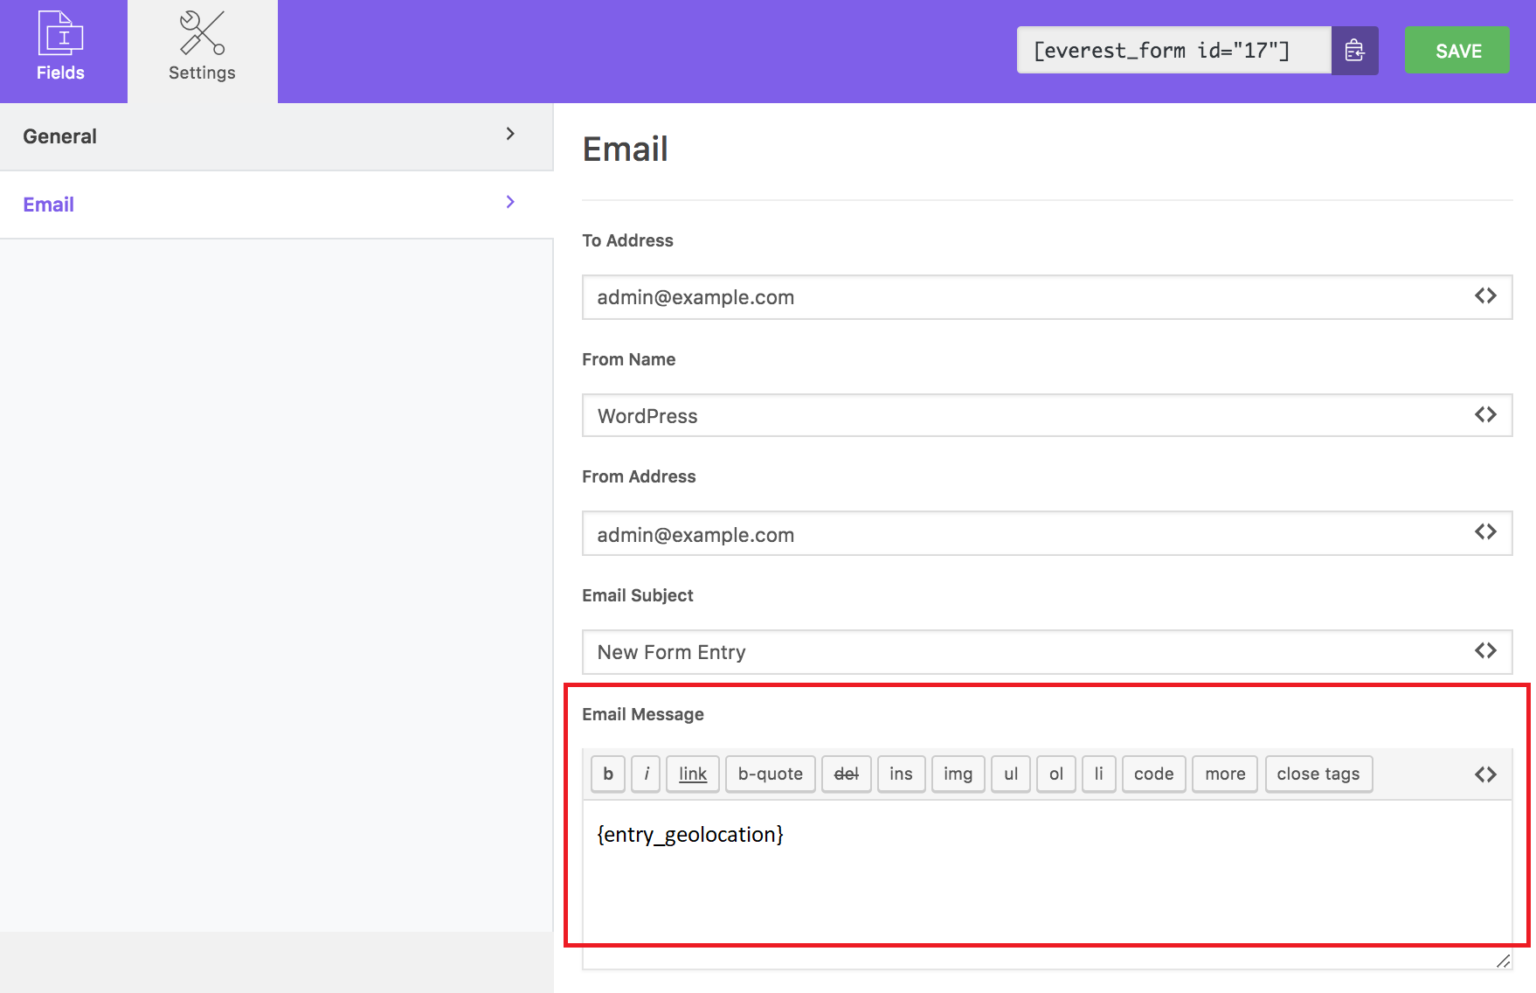 promevo view user email activity audit